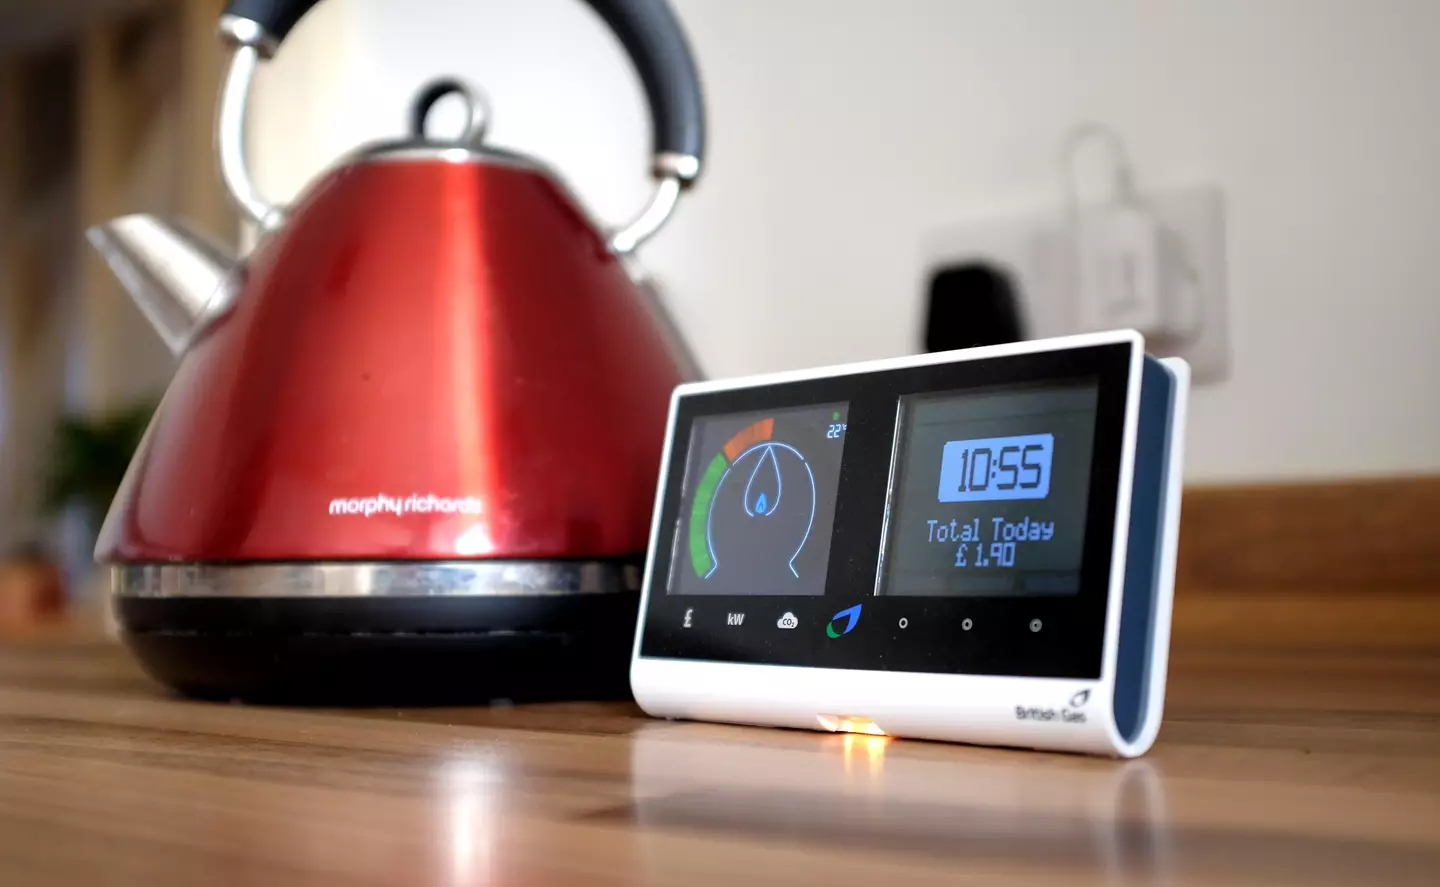 Houses with a smart meter could get money for not using electricity during peak times.